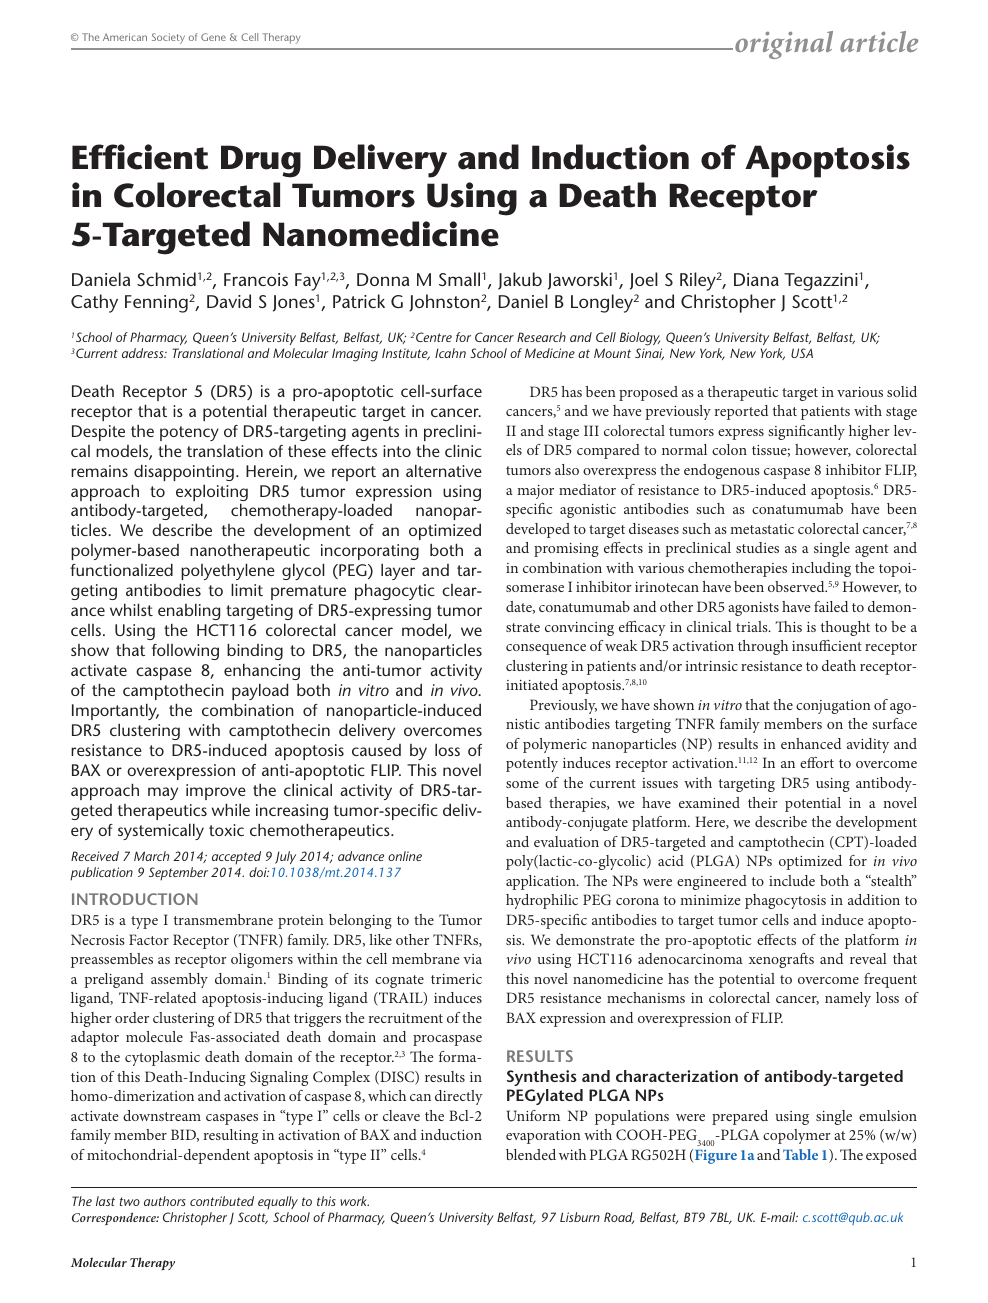 Efficient Drug Delivery And Induction Of Apoptosis In Colorectal Tumors Using A Death Receptor 5 Targeted Nanomedicine Topic Of Research Paper In Chemical Sciences Download Scholarly Article Pdf And Read For Free